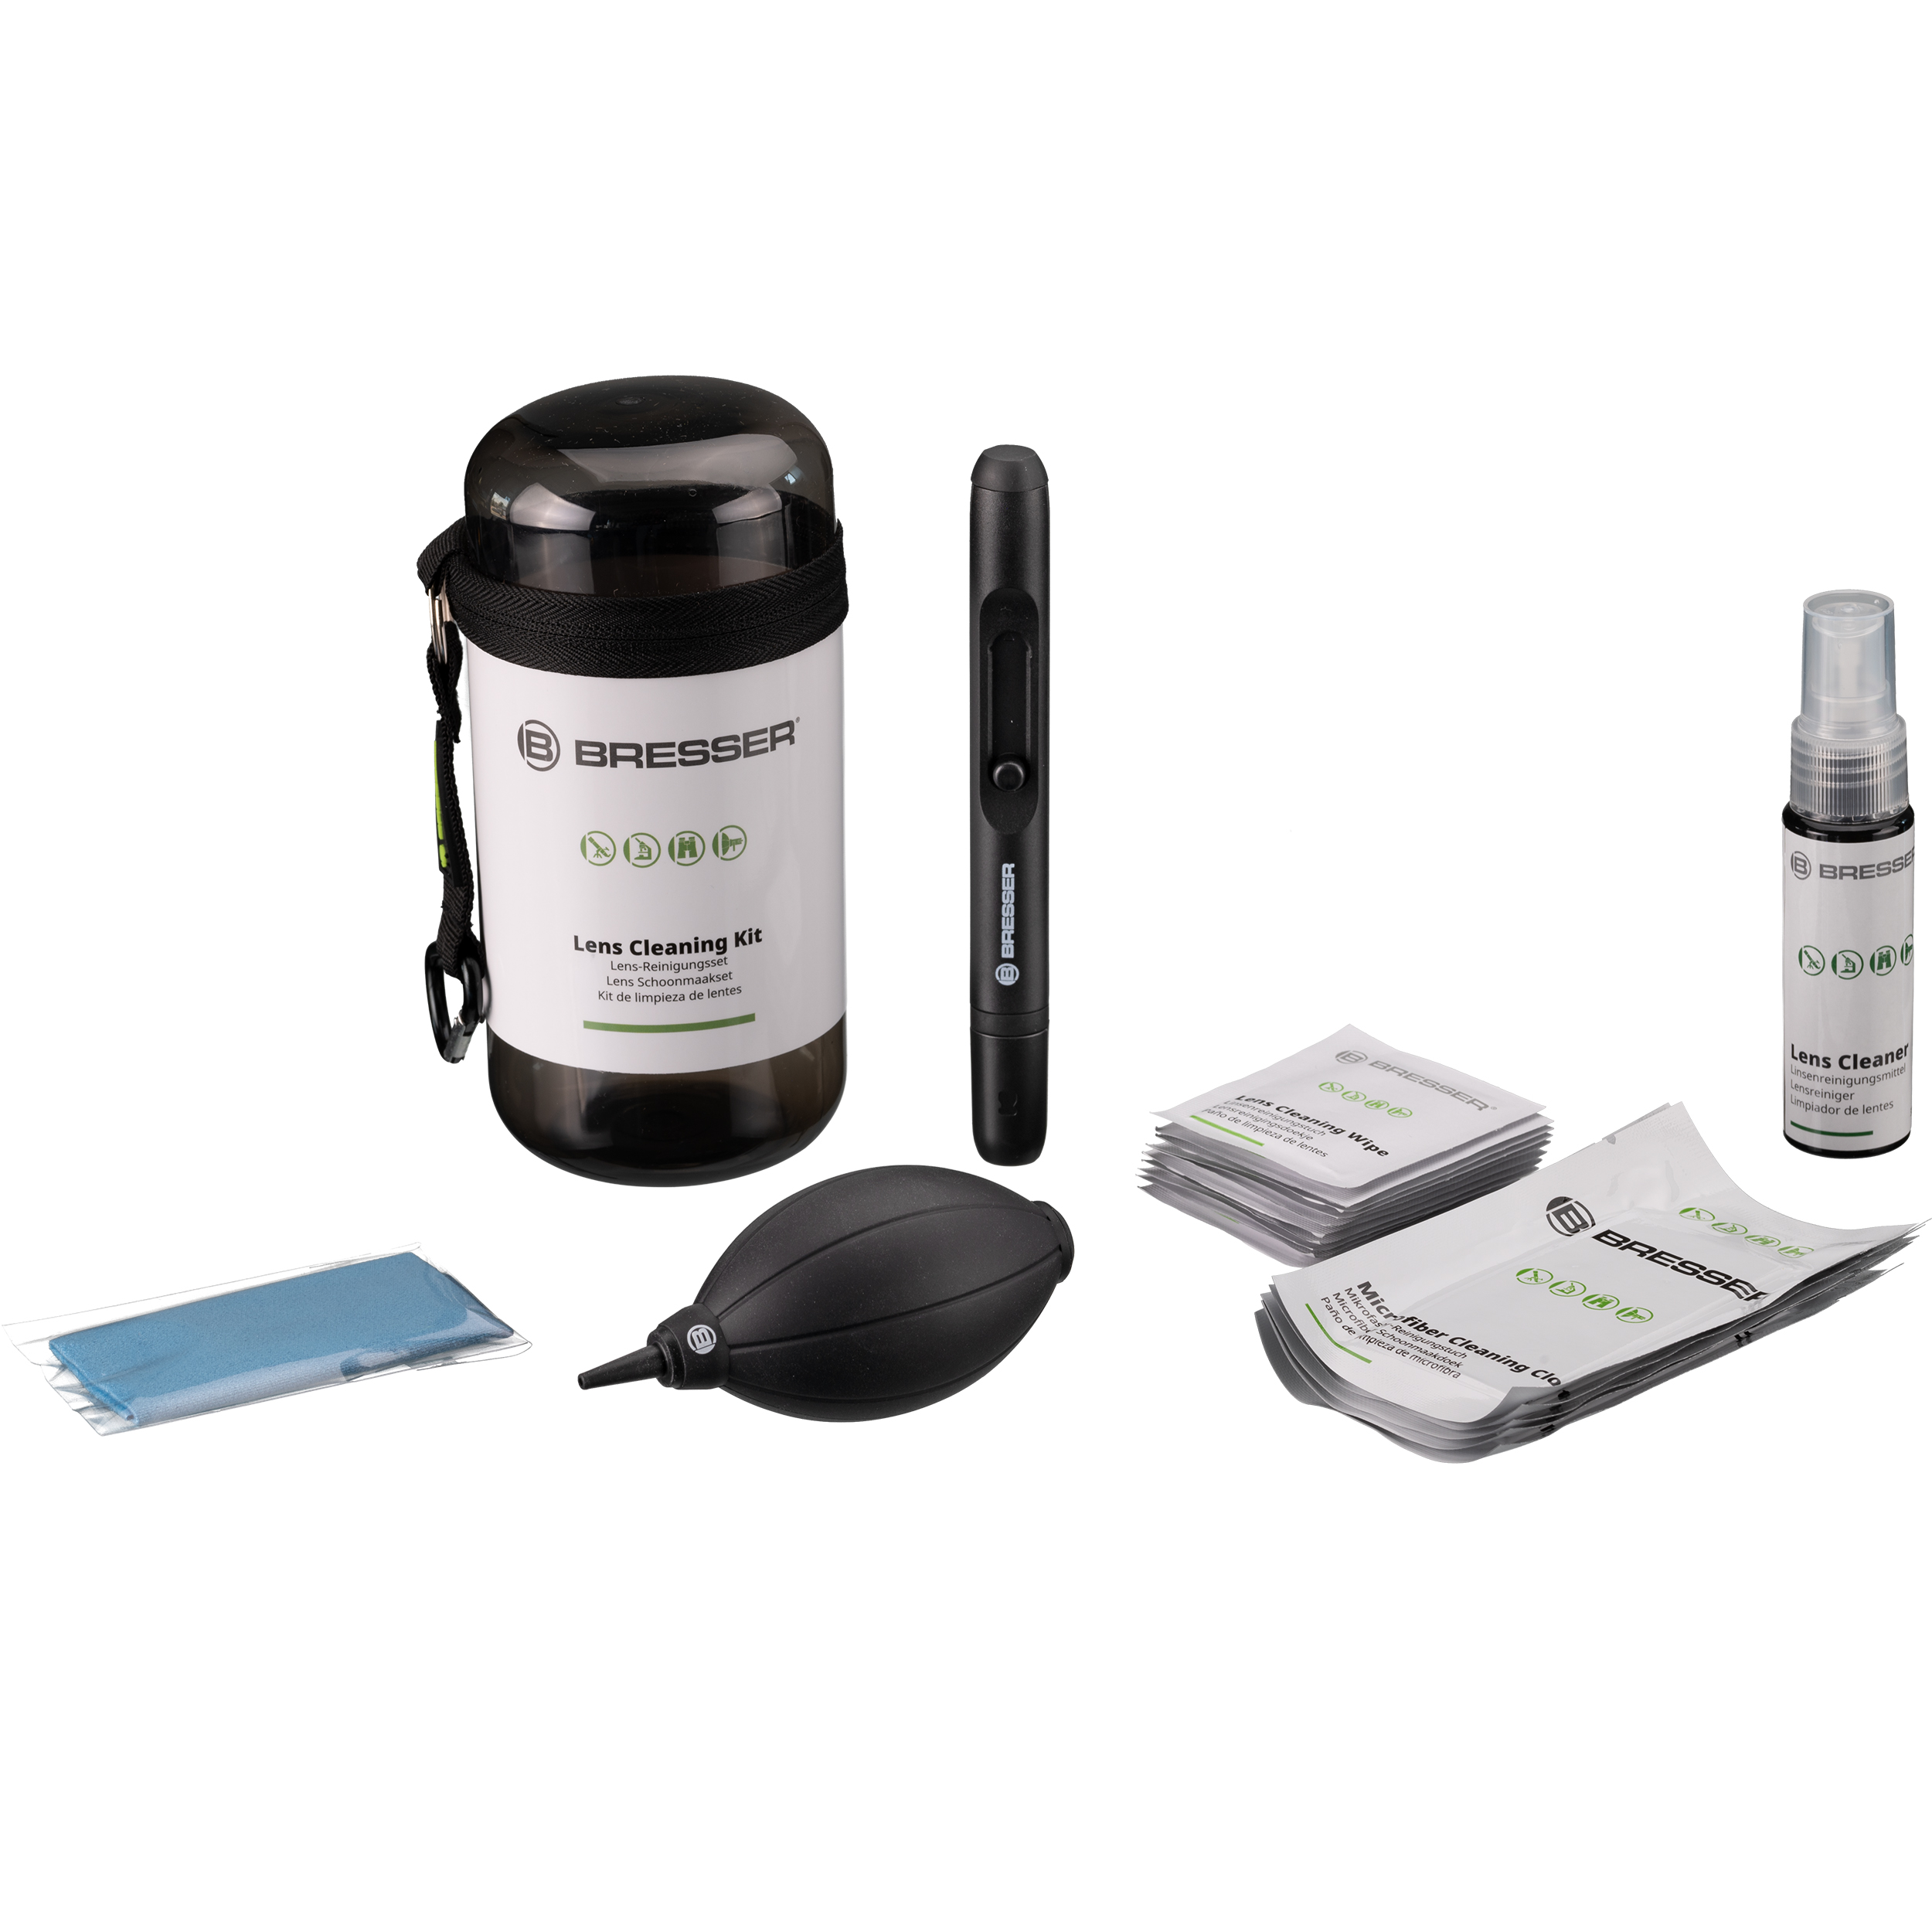 Bresser Camera and Lens Cleaning Kit